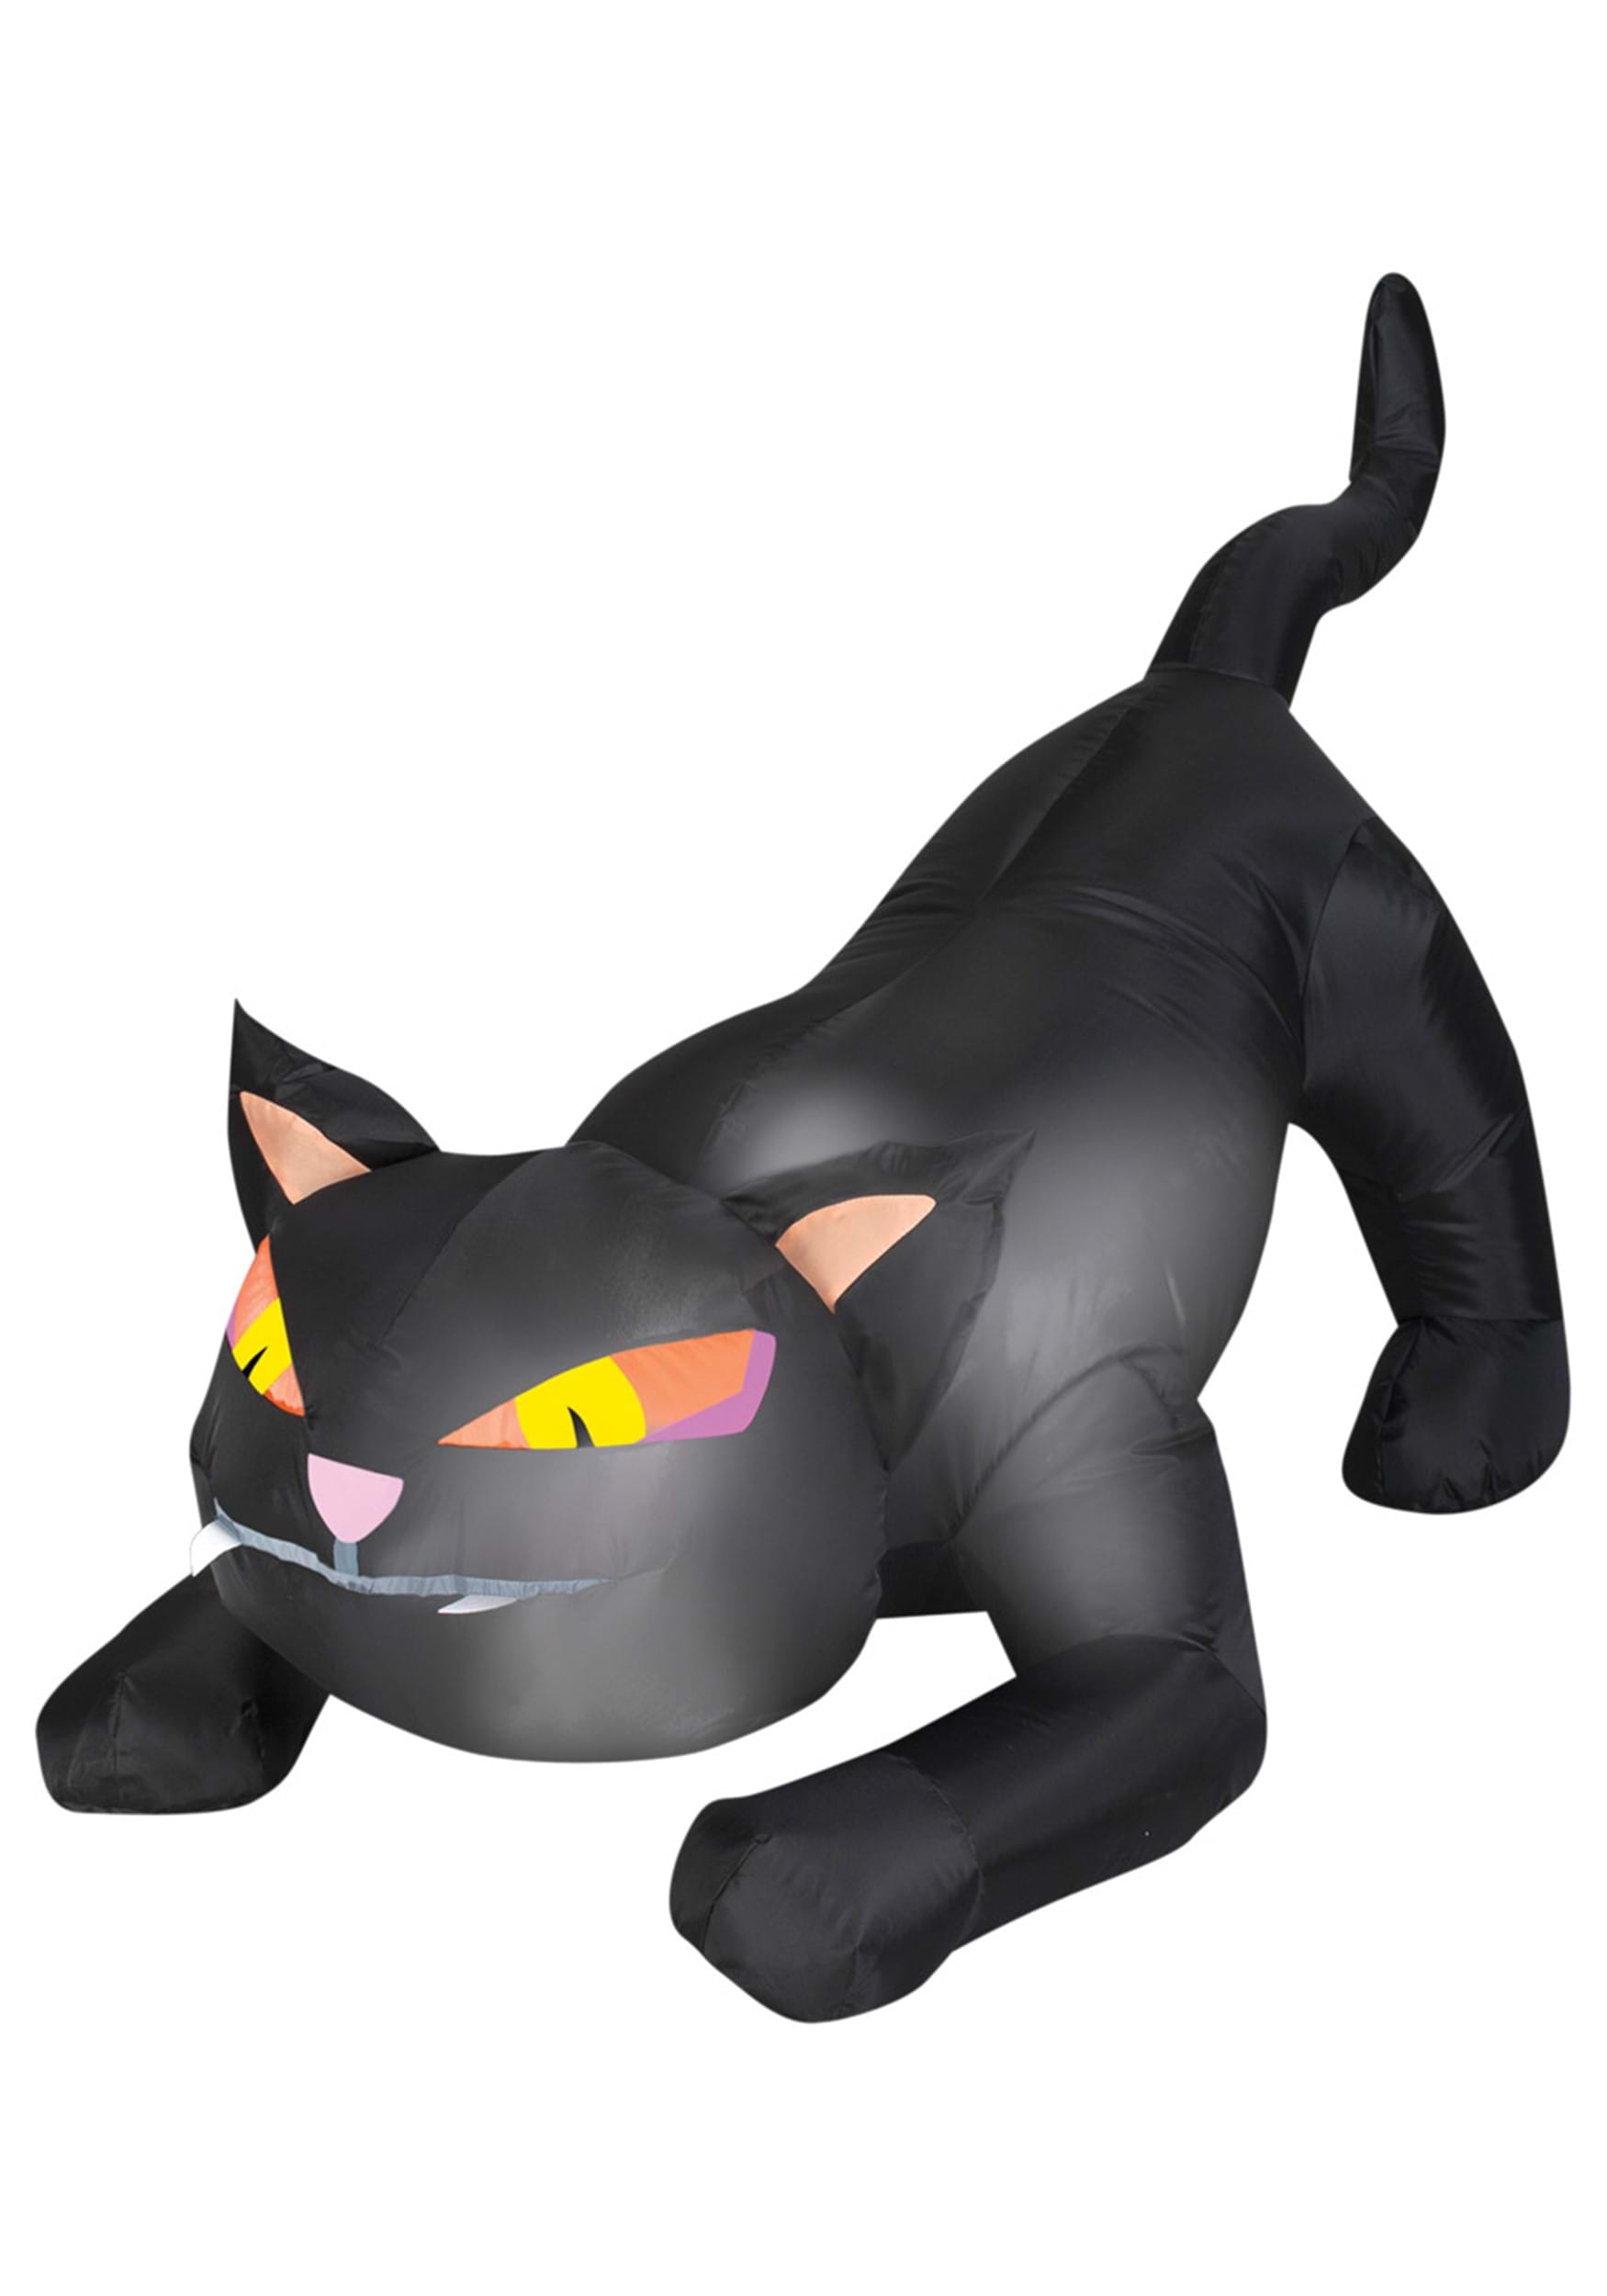 Inflatable Outdoor Small Black Cat Decoration